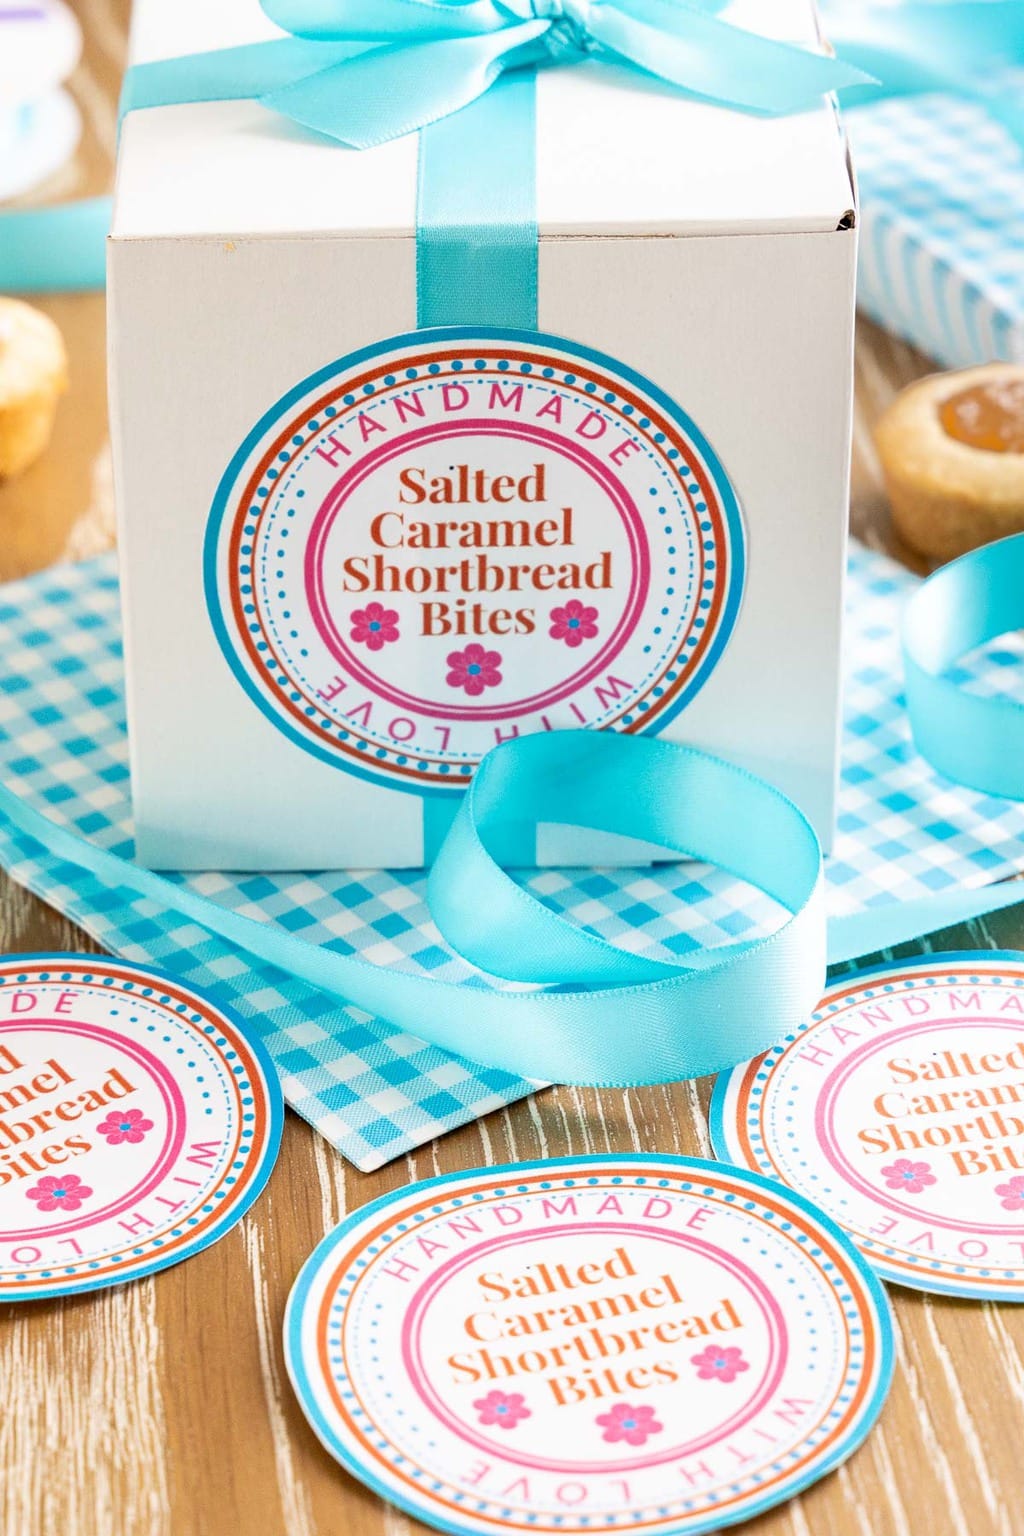 Vertical closeup photo of custom labels and a gift box for Ridiculously Easy Salted Caramel Shortbread Bites.